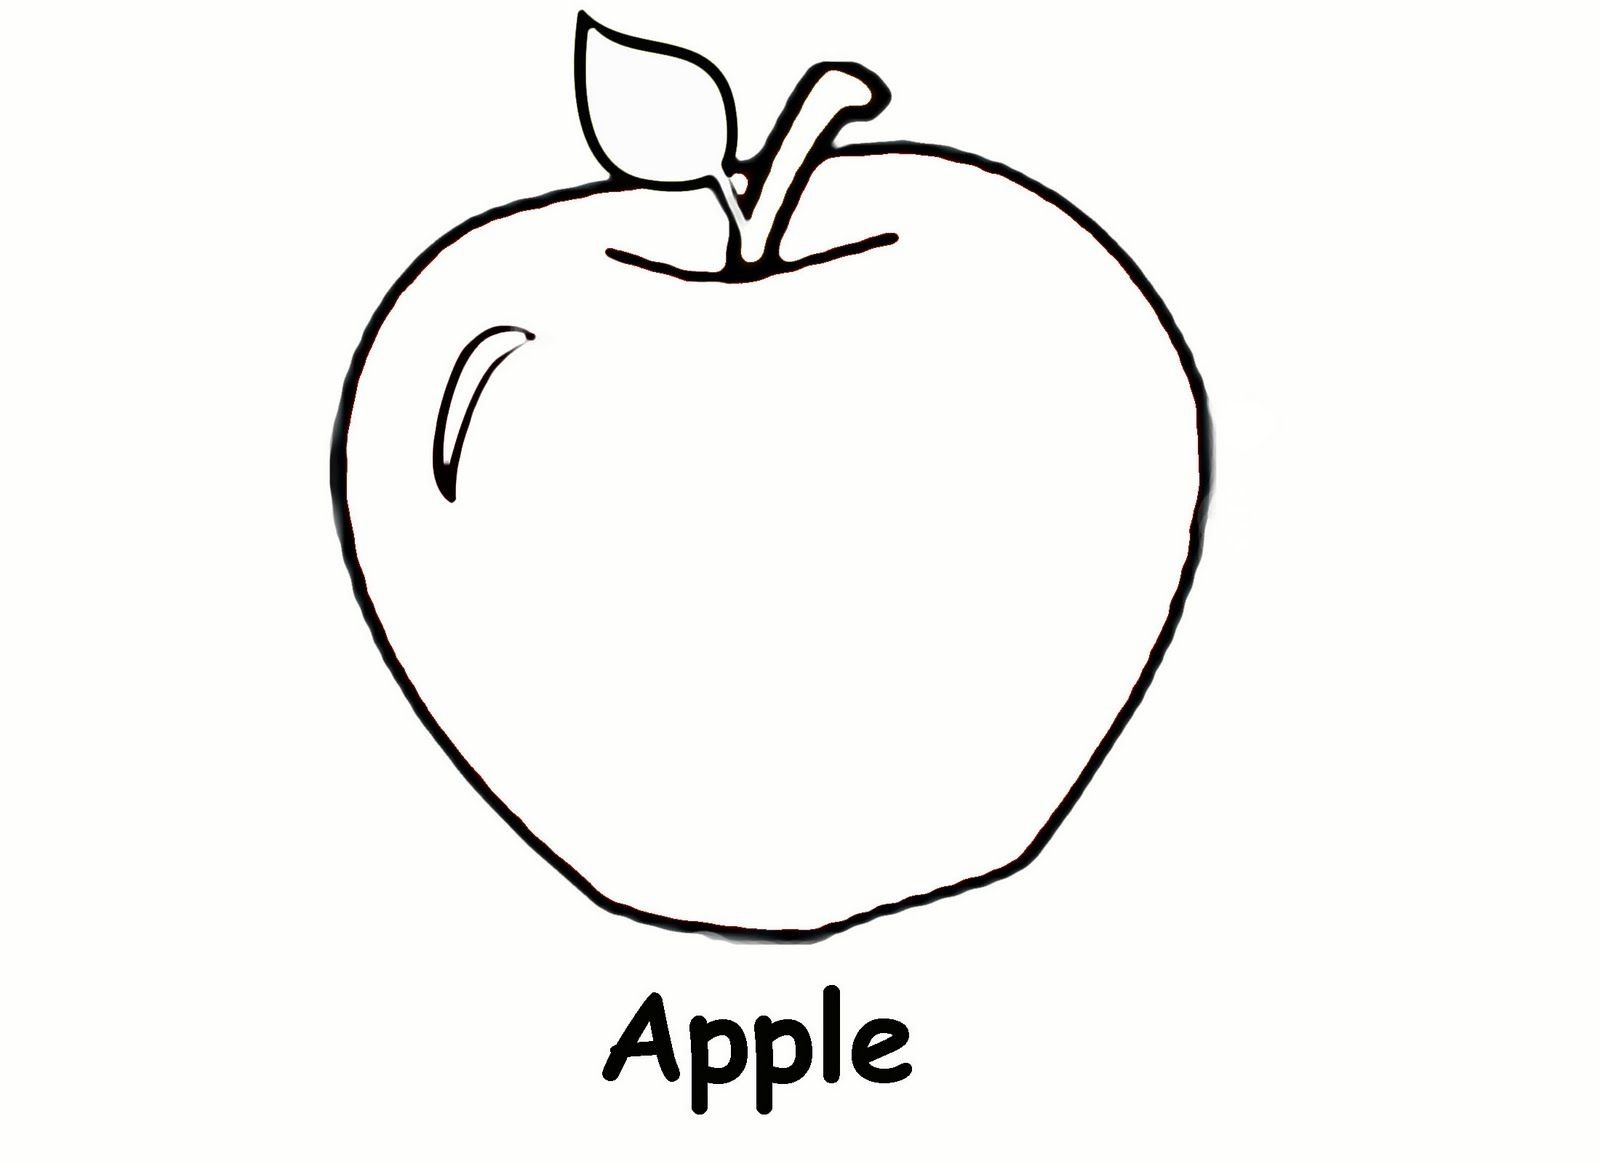 Free Printable Apple Coloring Pages For Kids | Coloring Book Pages - Free Printable Pages For Preschoolers